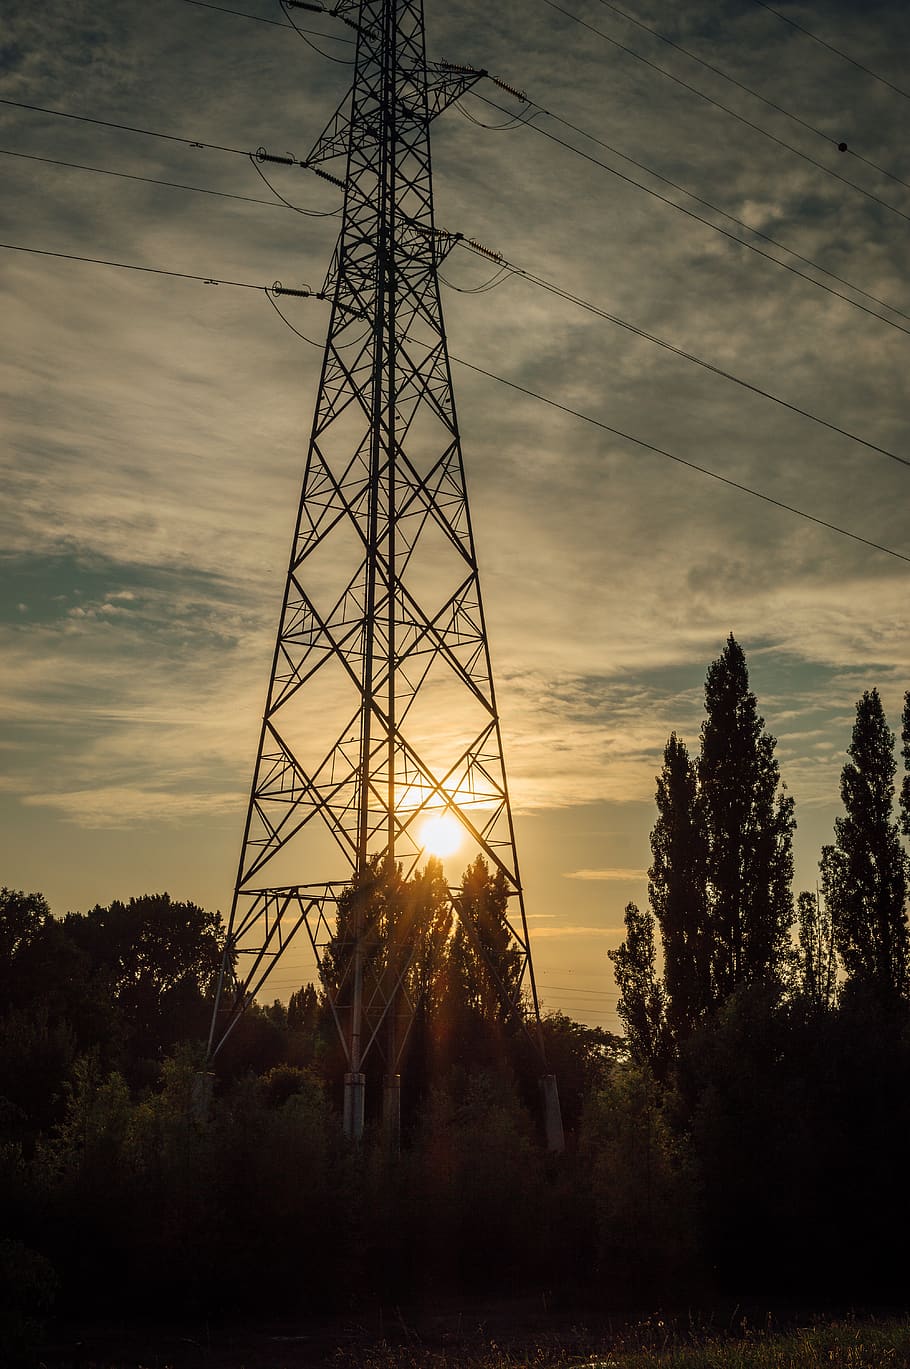 cable, utility pole, power lines, sunset, electric transmission tower